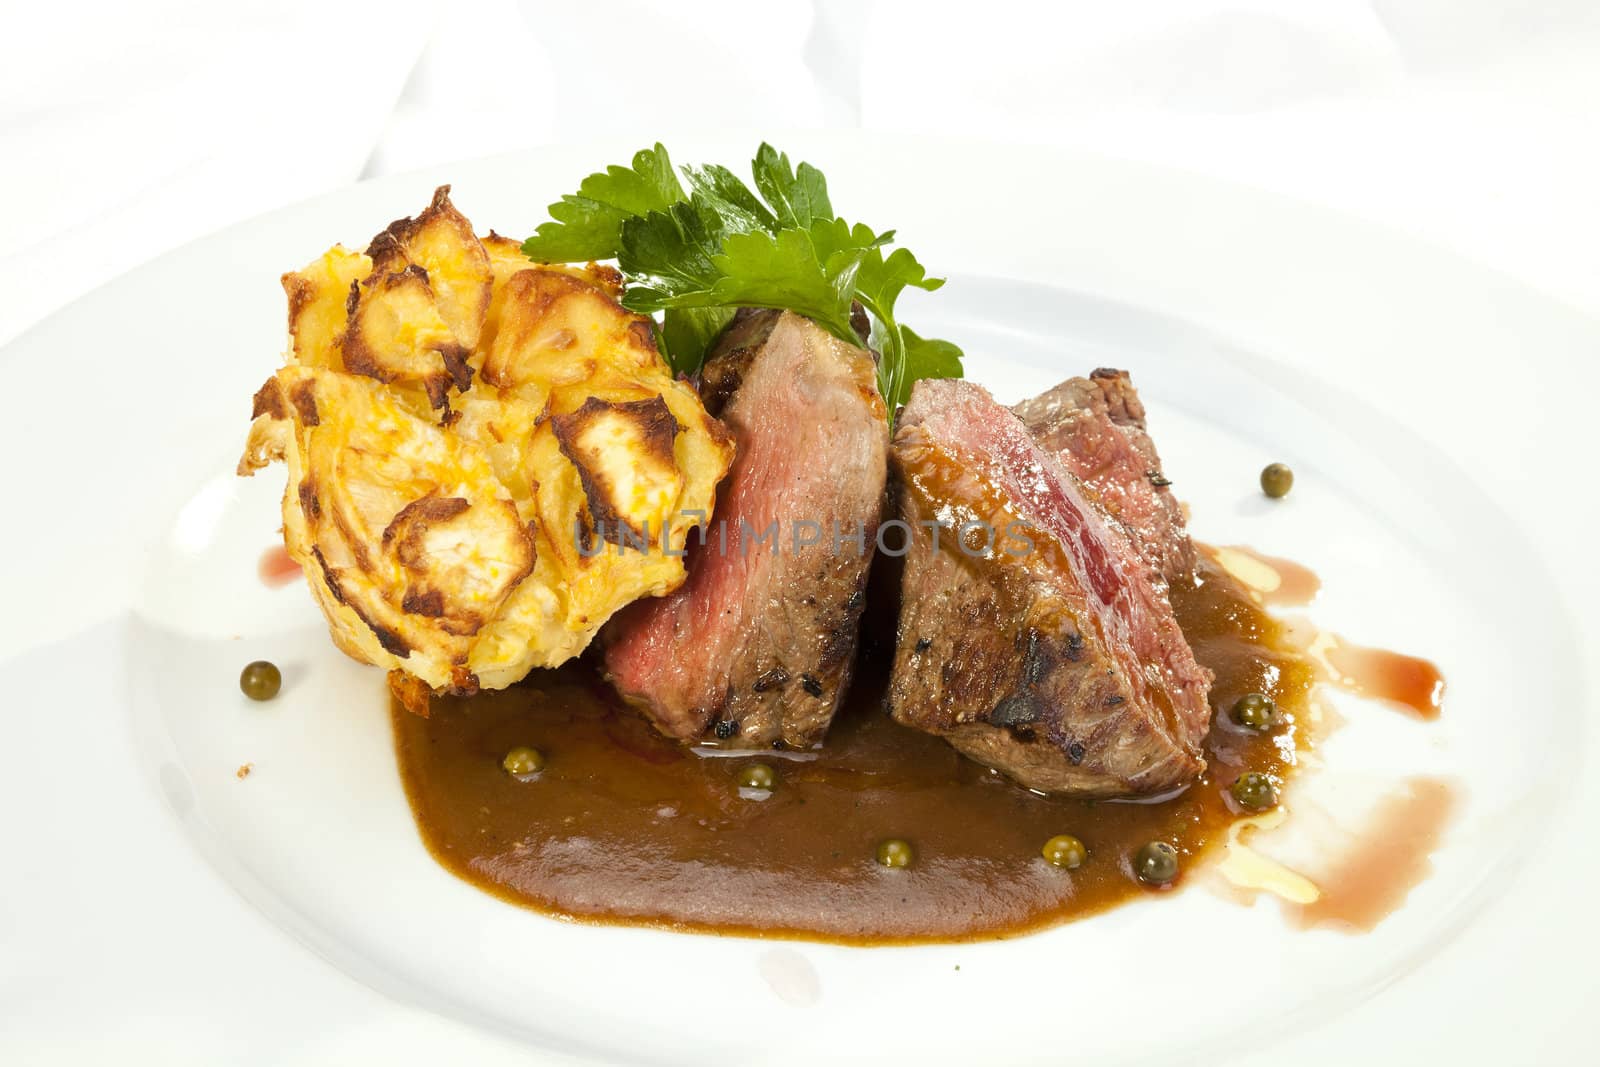 Grilled Sirloin with pepper sauce and grilled potatoes